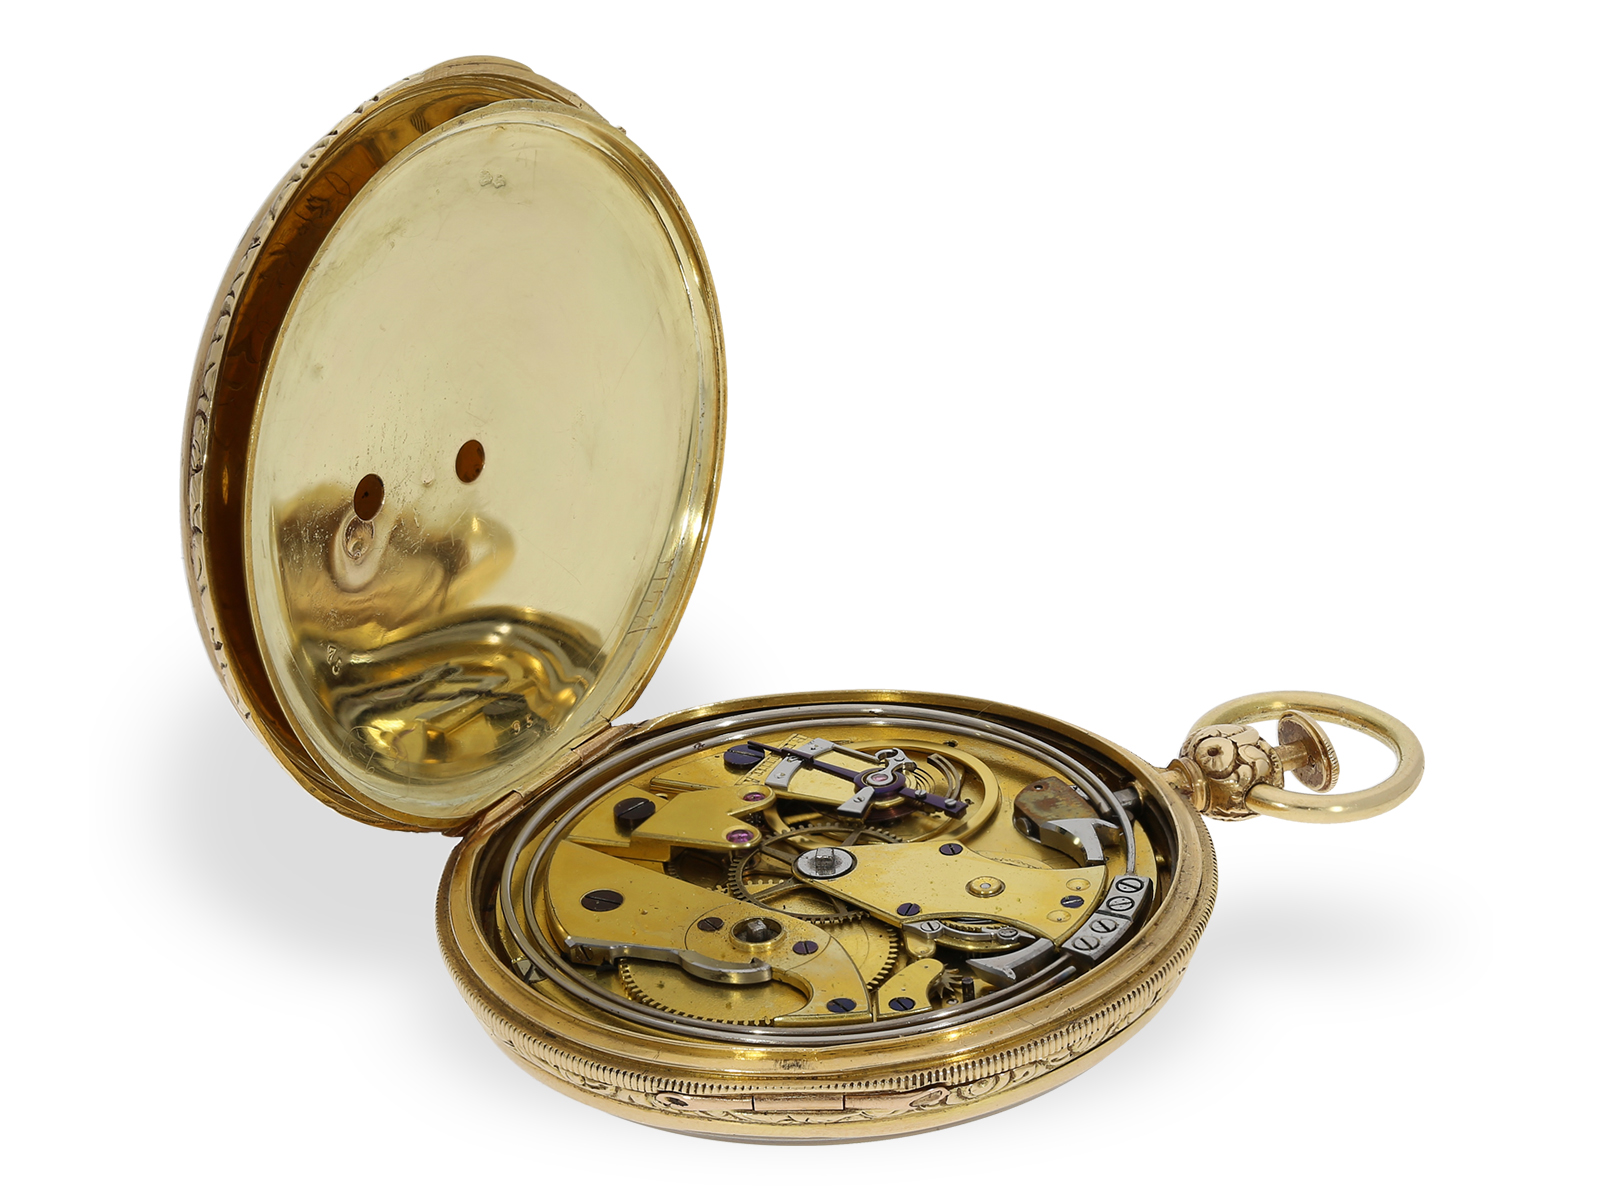 Pocket watch: important enamel watch with erotic scene, repeater and ruby cylinder escapement, Alleg - Image 5 of 7